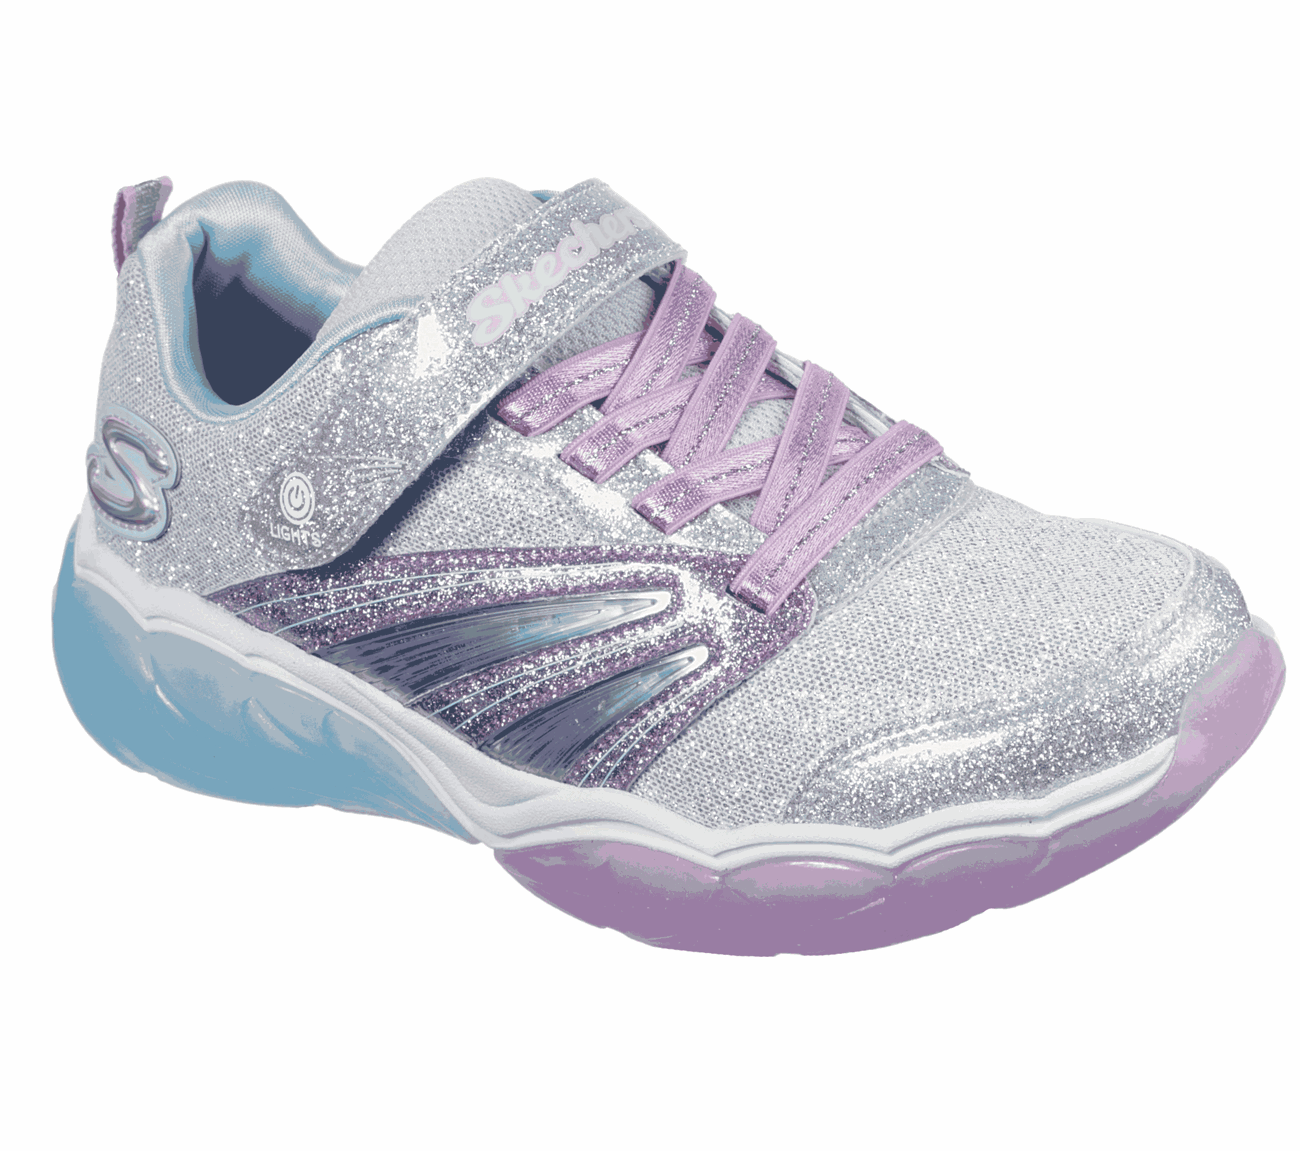 skechers fusion sneakers review off 76 